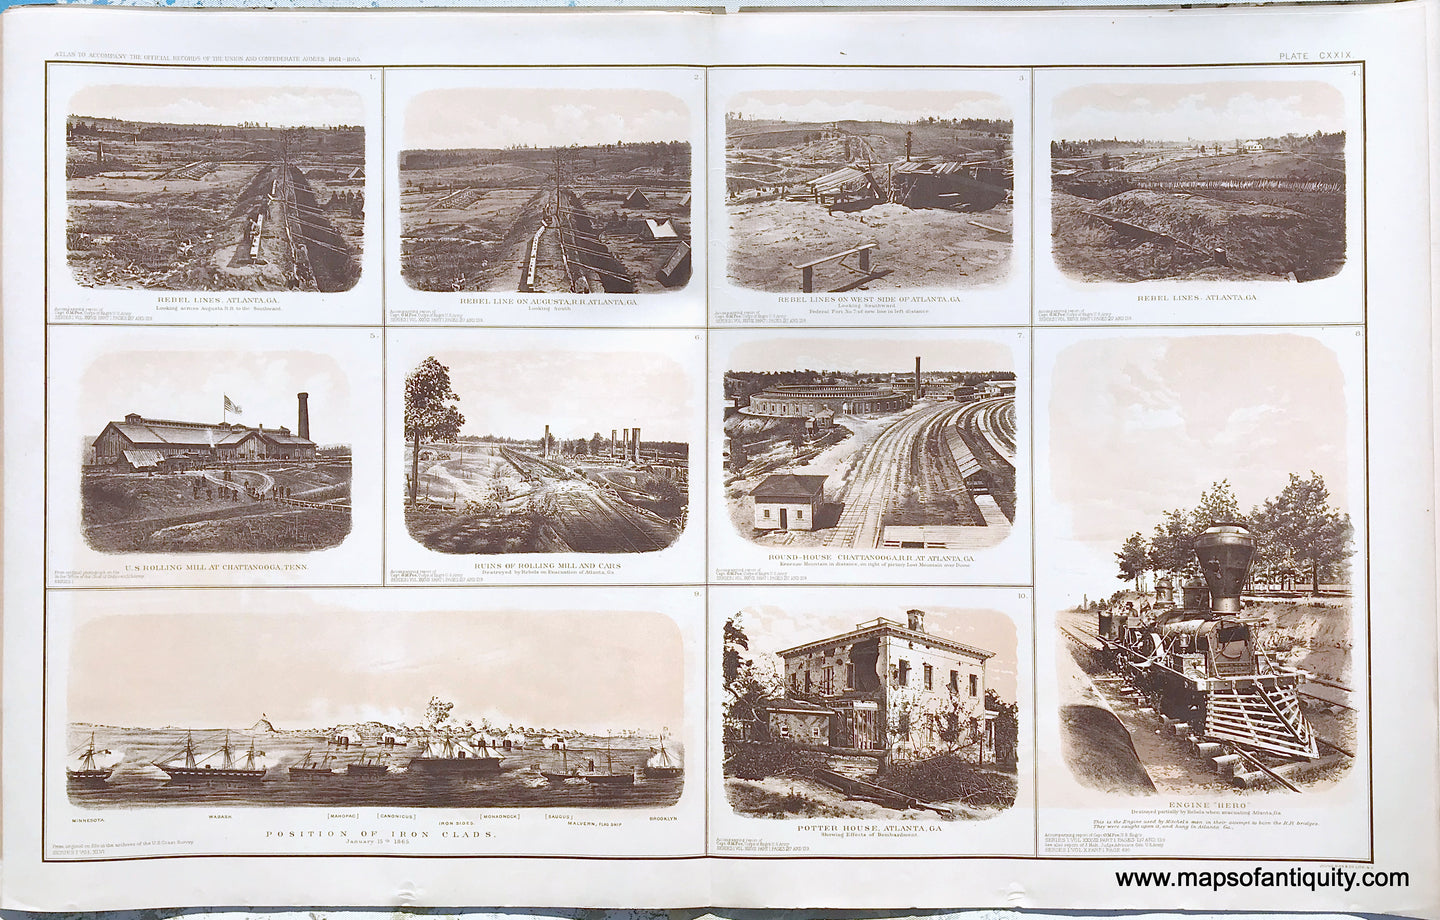 Antique-Lithograph-Print-Plate-129.-Four-photographic-views-of-Rebel-Lines-in-Atlanta-Ga.-/-Views-of-U.S.-Rolling-Mill-at-Chattanooga-Tenn.-/-Ruins-of-Rolling-Mill-and-Cars-/-Round-House-Chattanooga-R.R.-at-Atlanta-Ga.-/-Potter-House-Ga.-/-Engine--/-Panoramic-view-of-Position-of-Iron-Clads-January-15th-1865.--1894-US-War-Dept.-Civil-War-Civil-War-1800s-19th-century-Maps-of-Antiquity